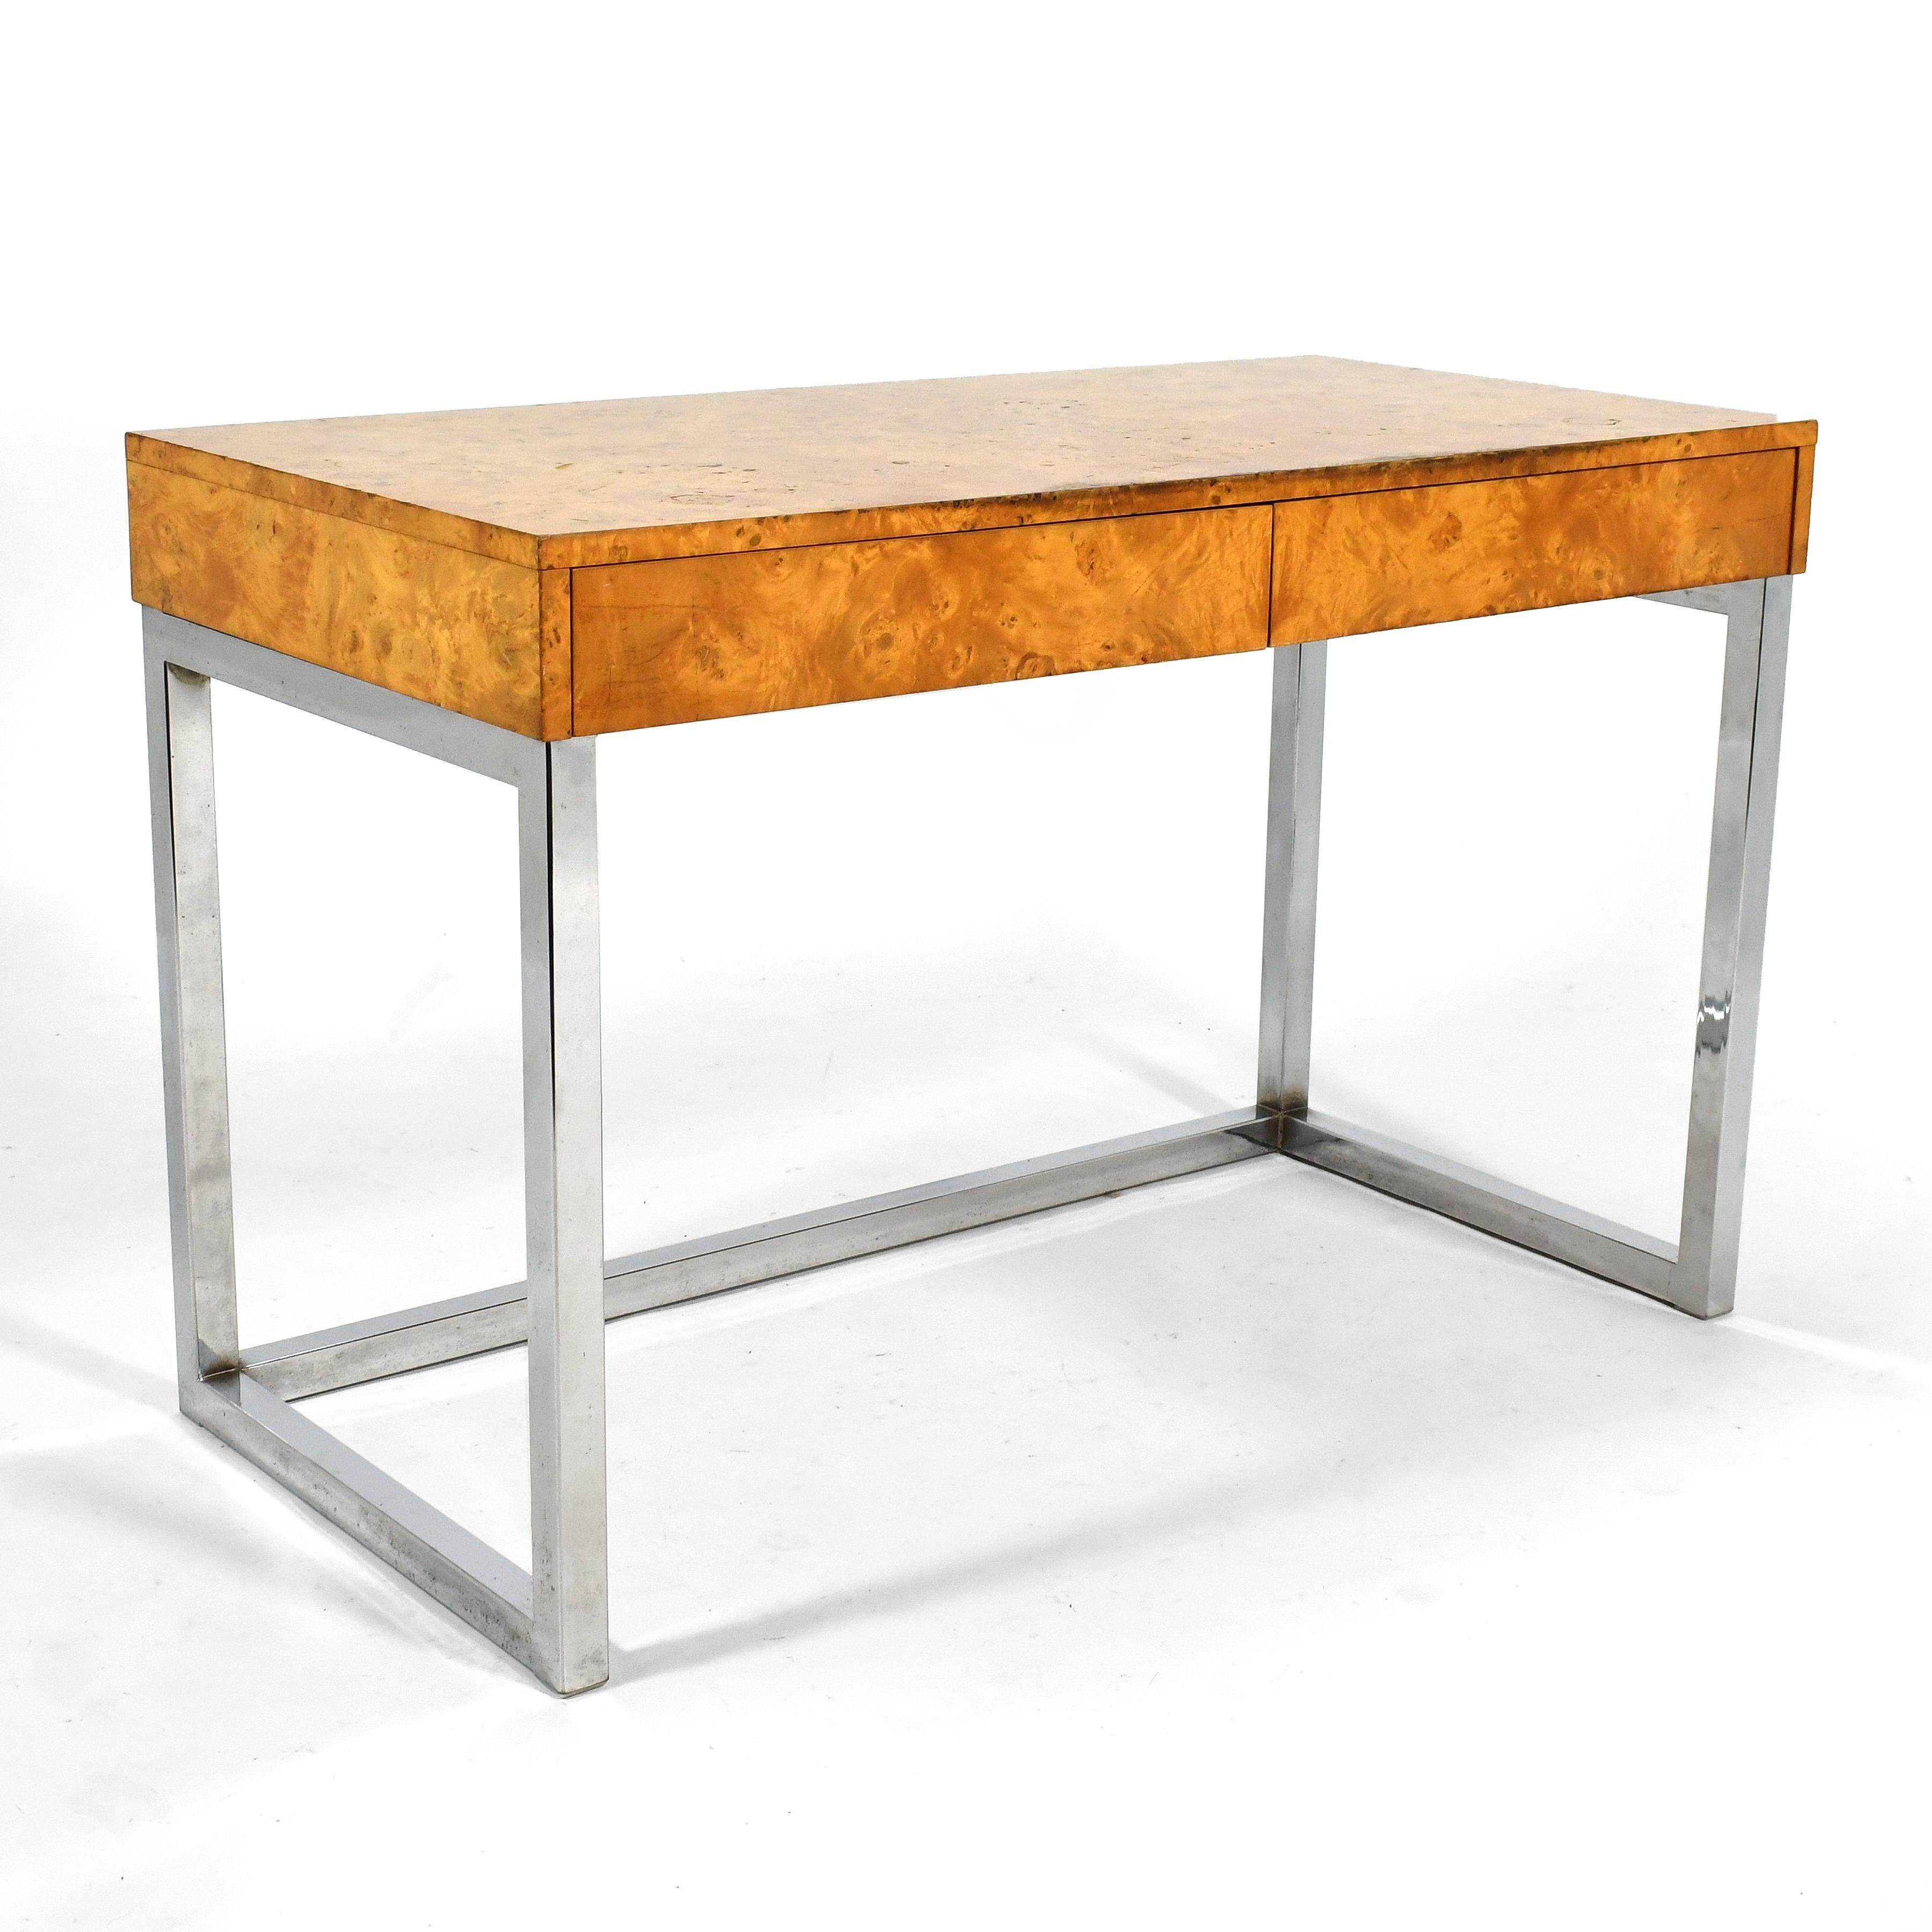 This desk in active olive burl with two shallow drawers and a chrome base clearly harkens to the designs of Milo Baughman.

Measures: 31